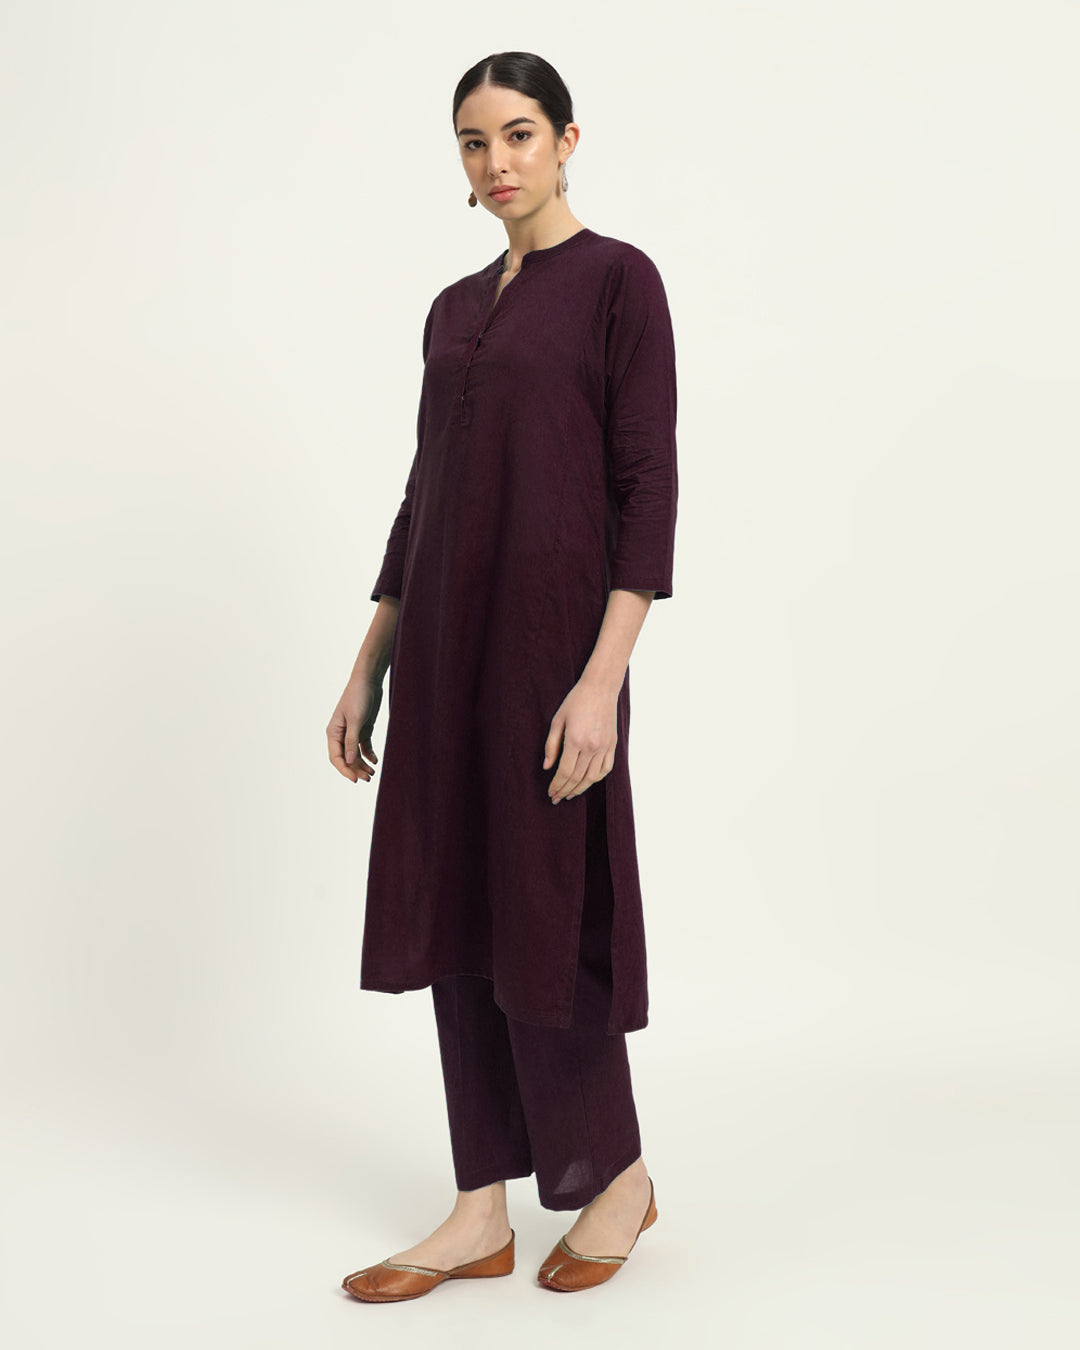 Plum Passion Everyday Bliss Notch Neck Solid Kurta (Without Bottoms)